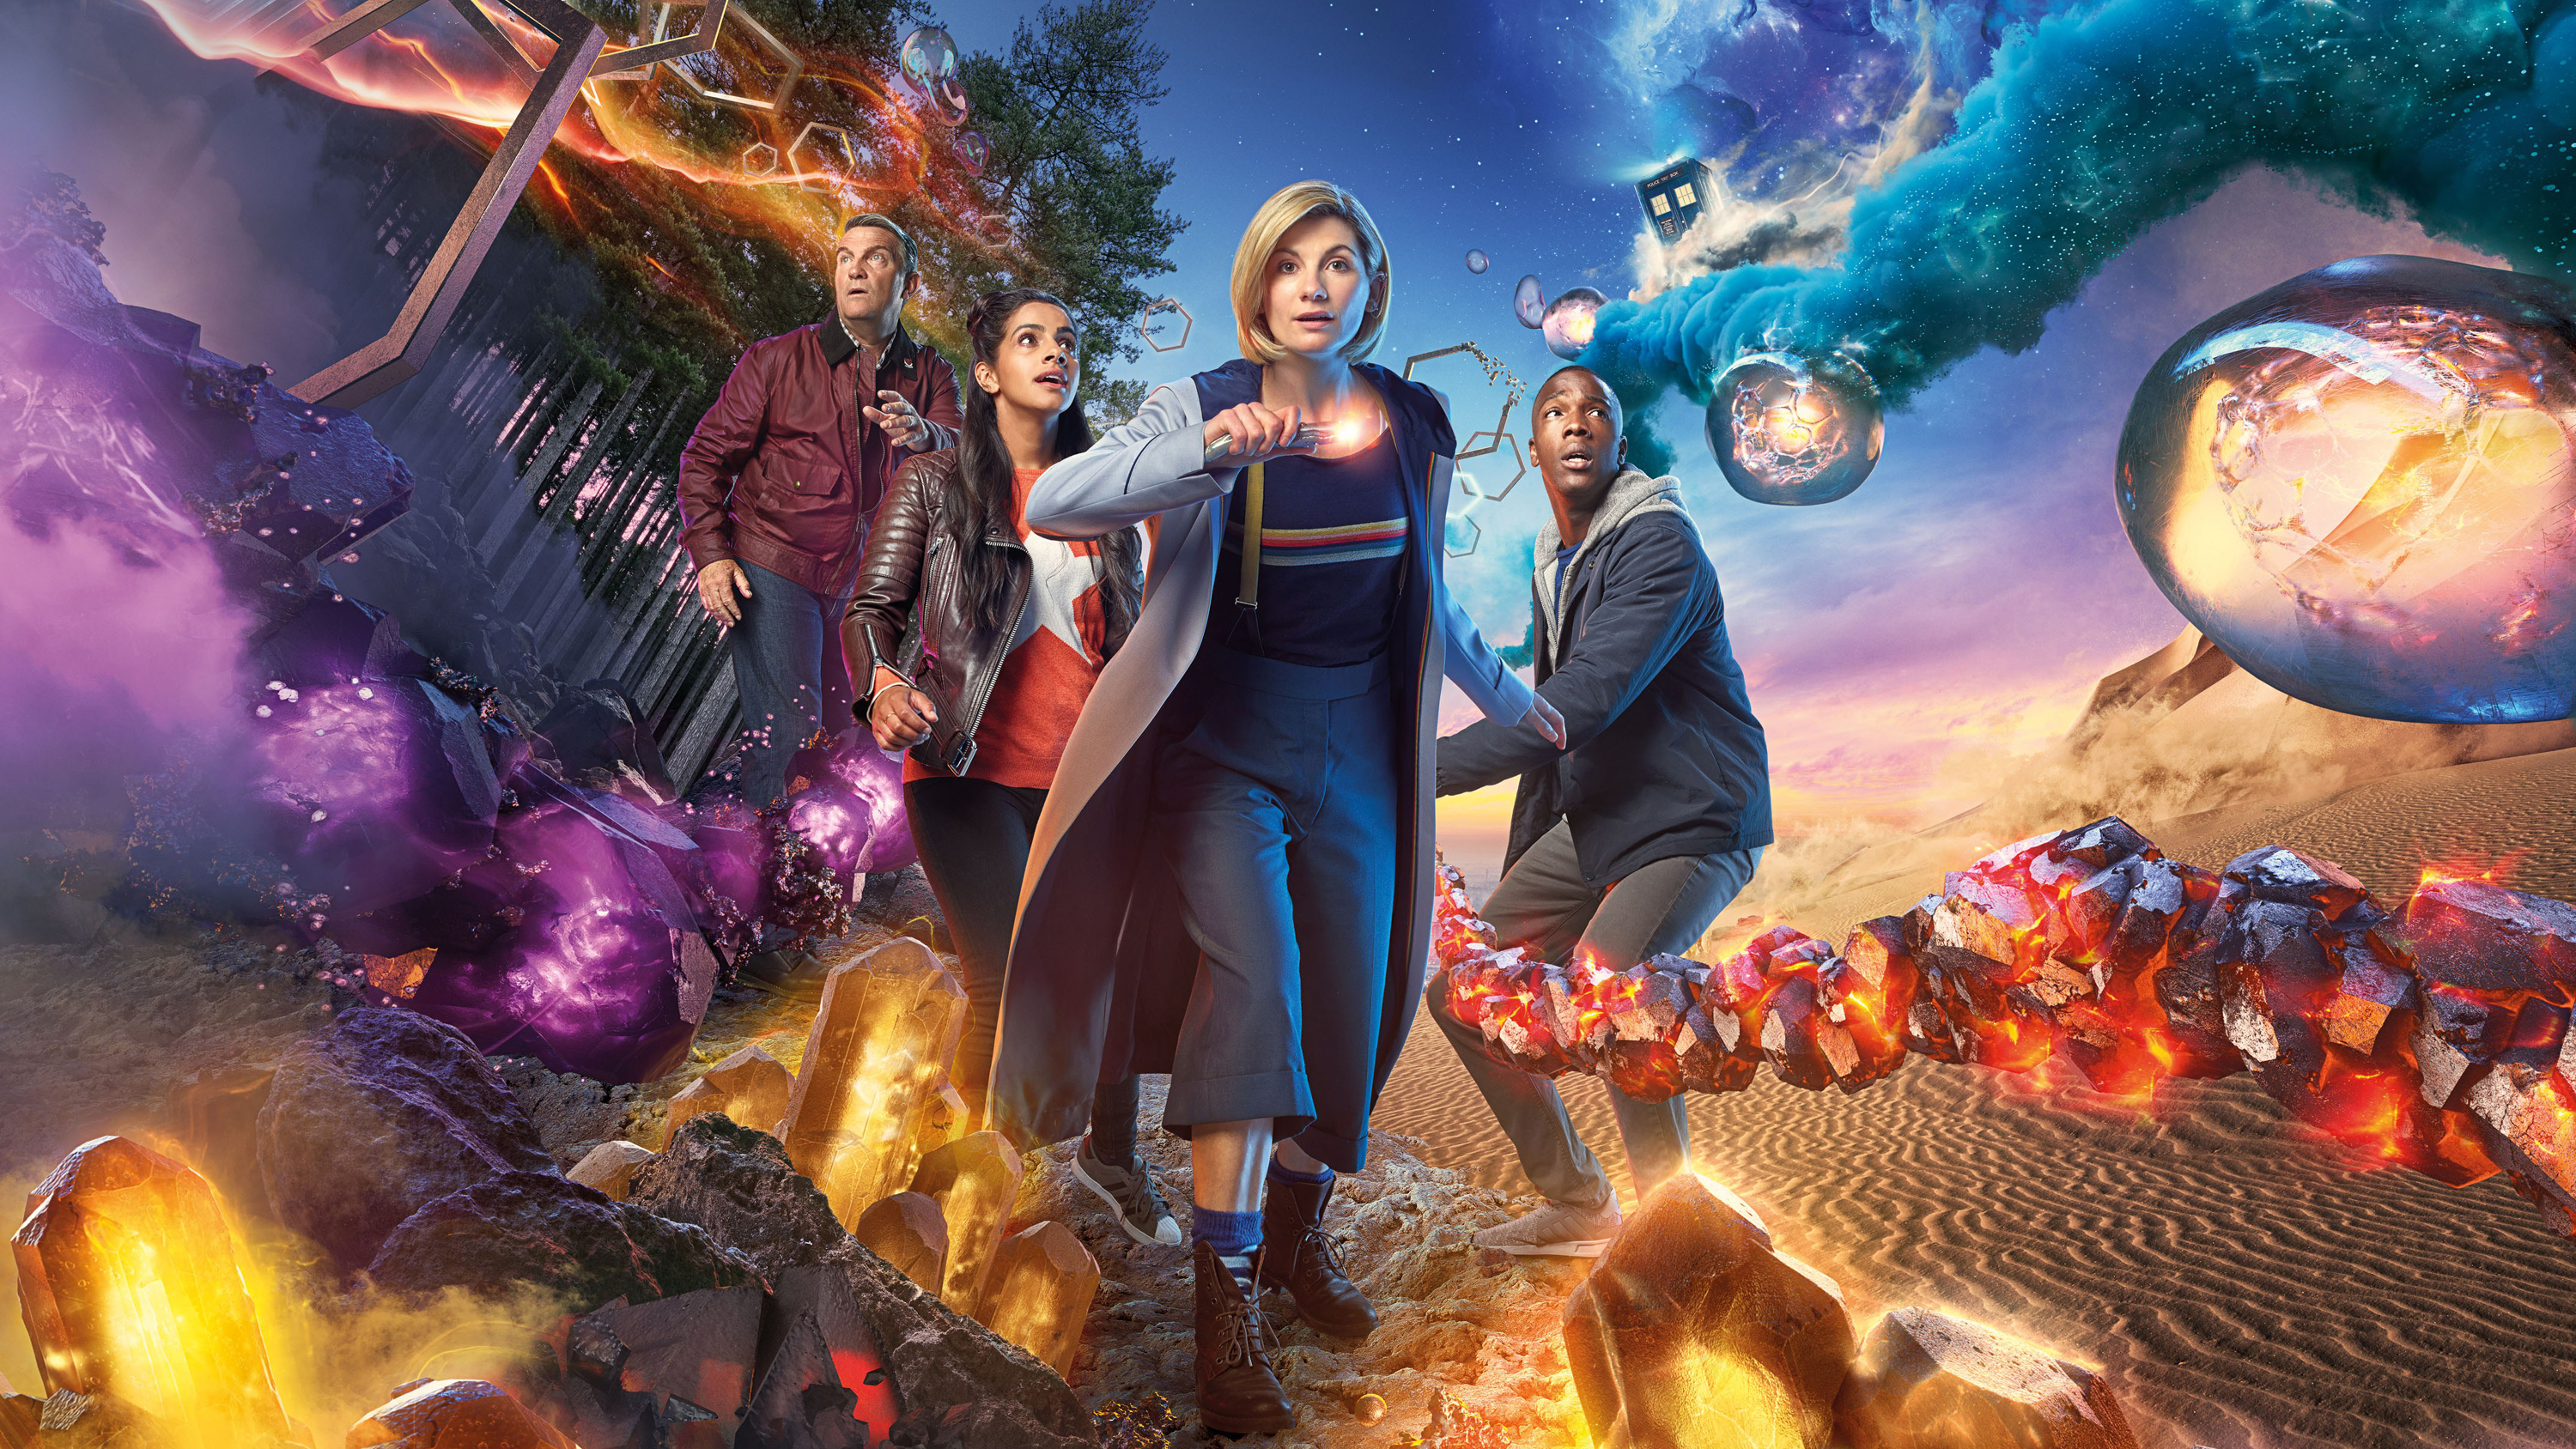 Doctor Who Jodie Whittaker 13Th Doctor Wallpapers